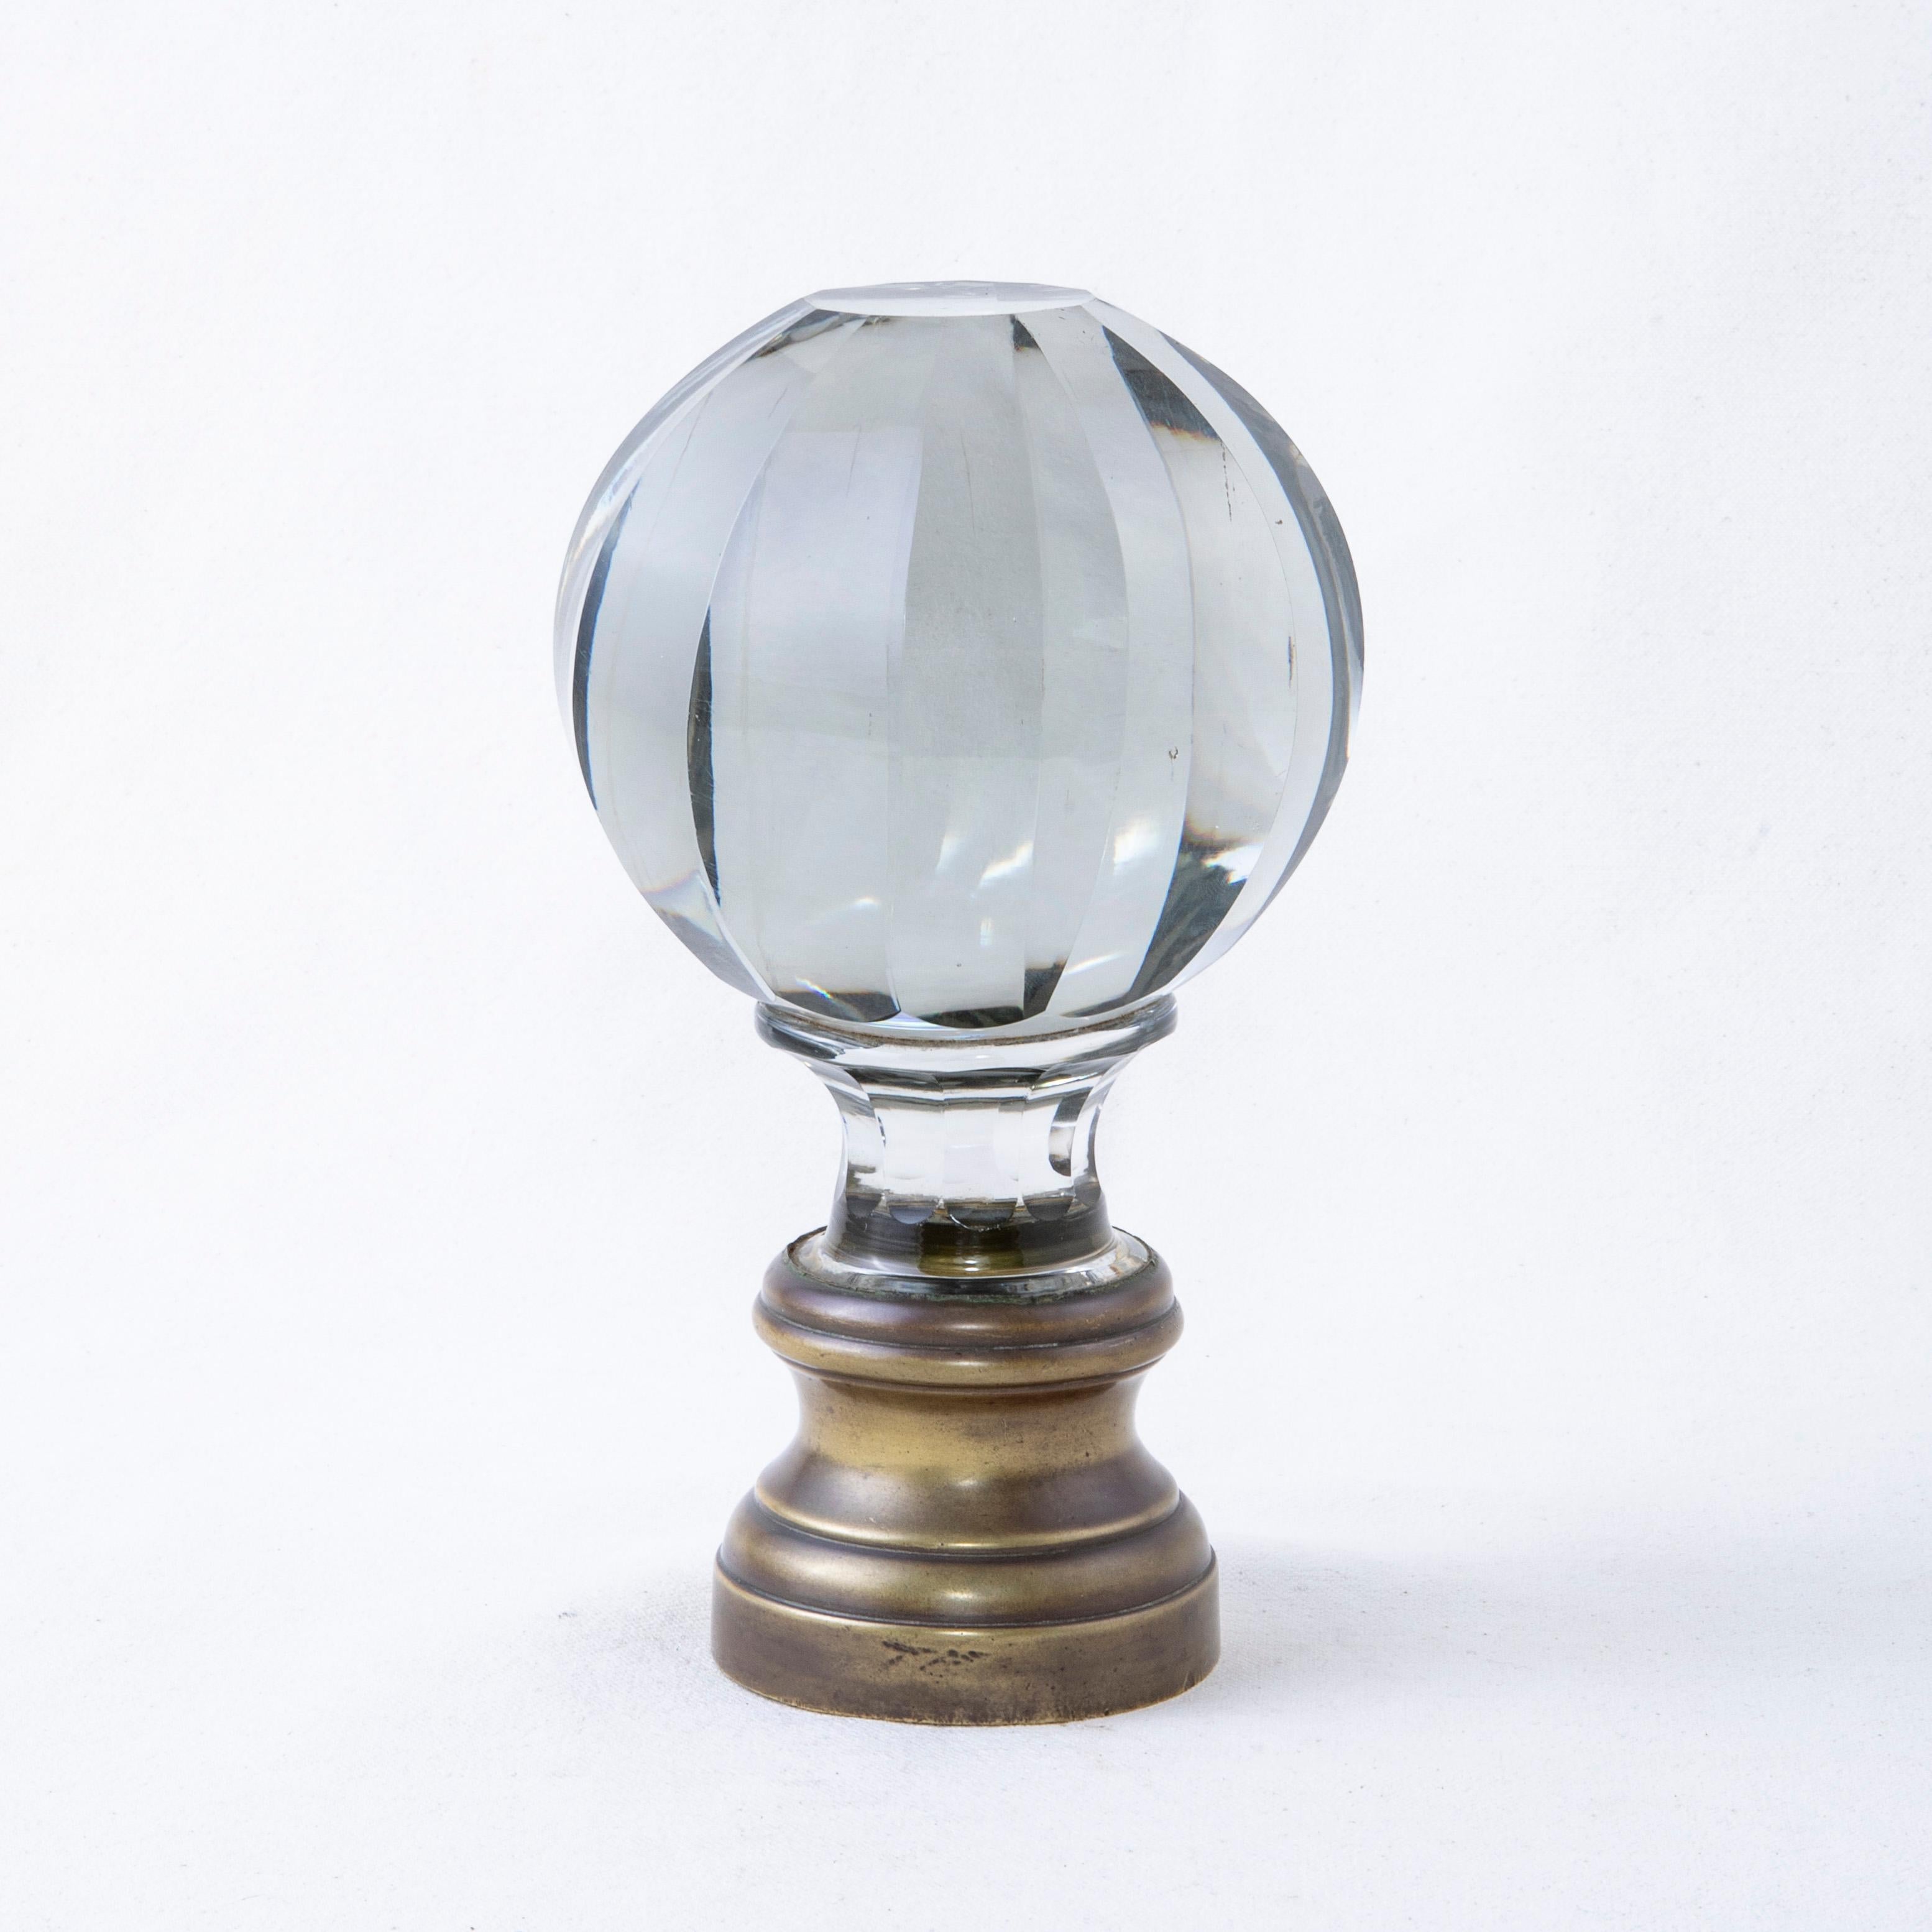 This very large late nineteenth century staircase finial was found in the city of Blois in the Loire Valley, the castle region of France. The finial features a multifaceted crystal ball mounted on a bronze base. The base may be secured onto a